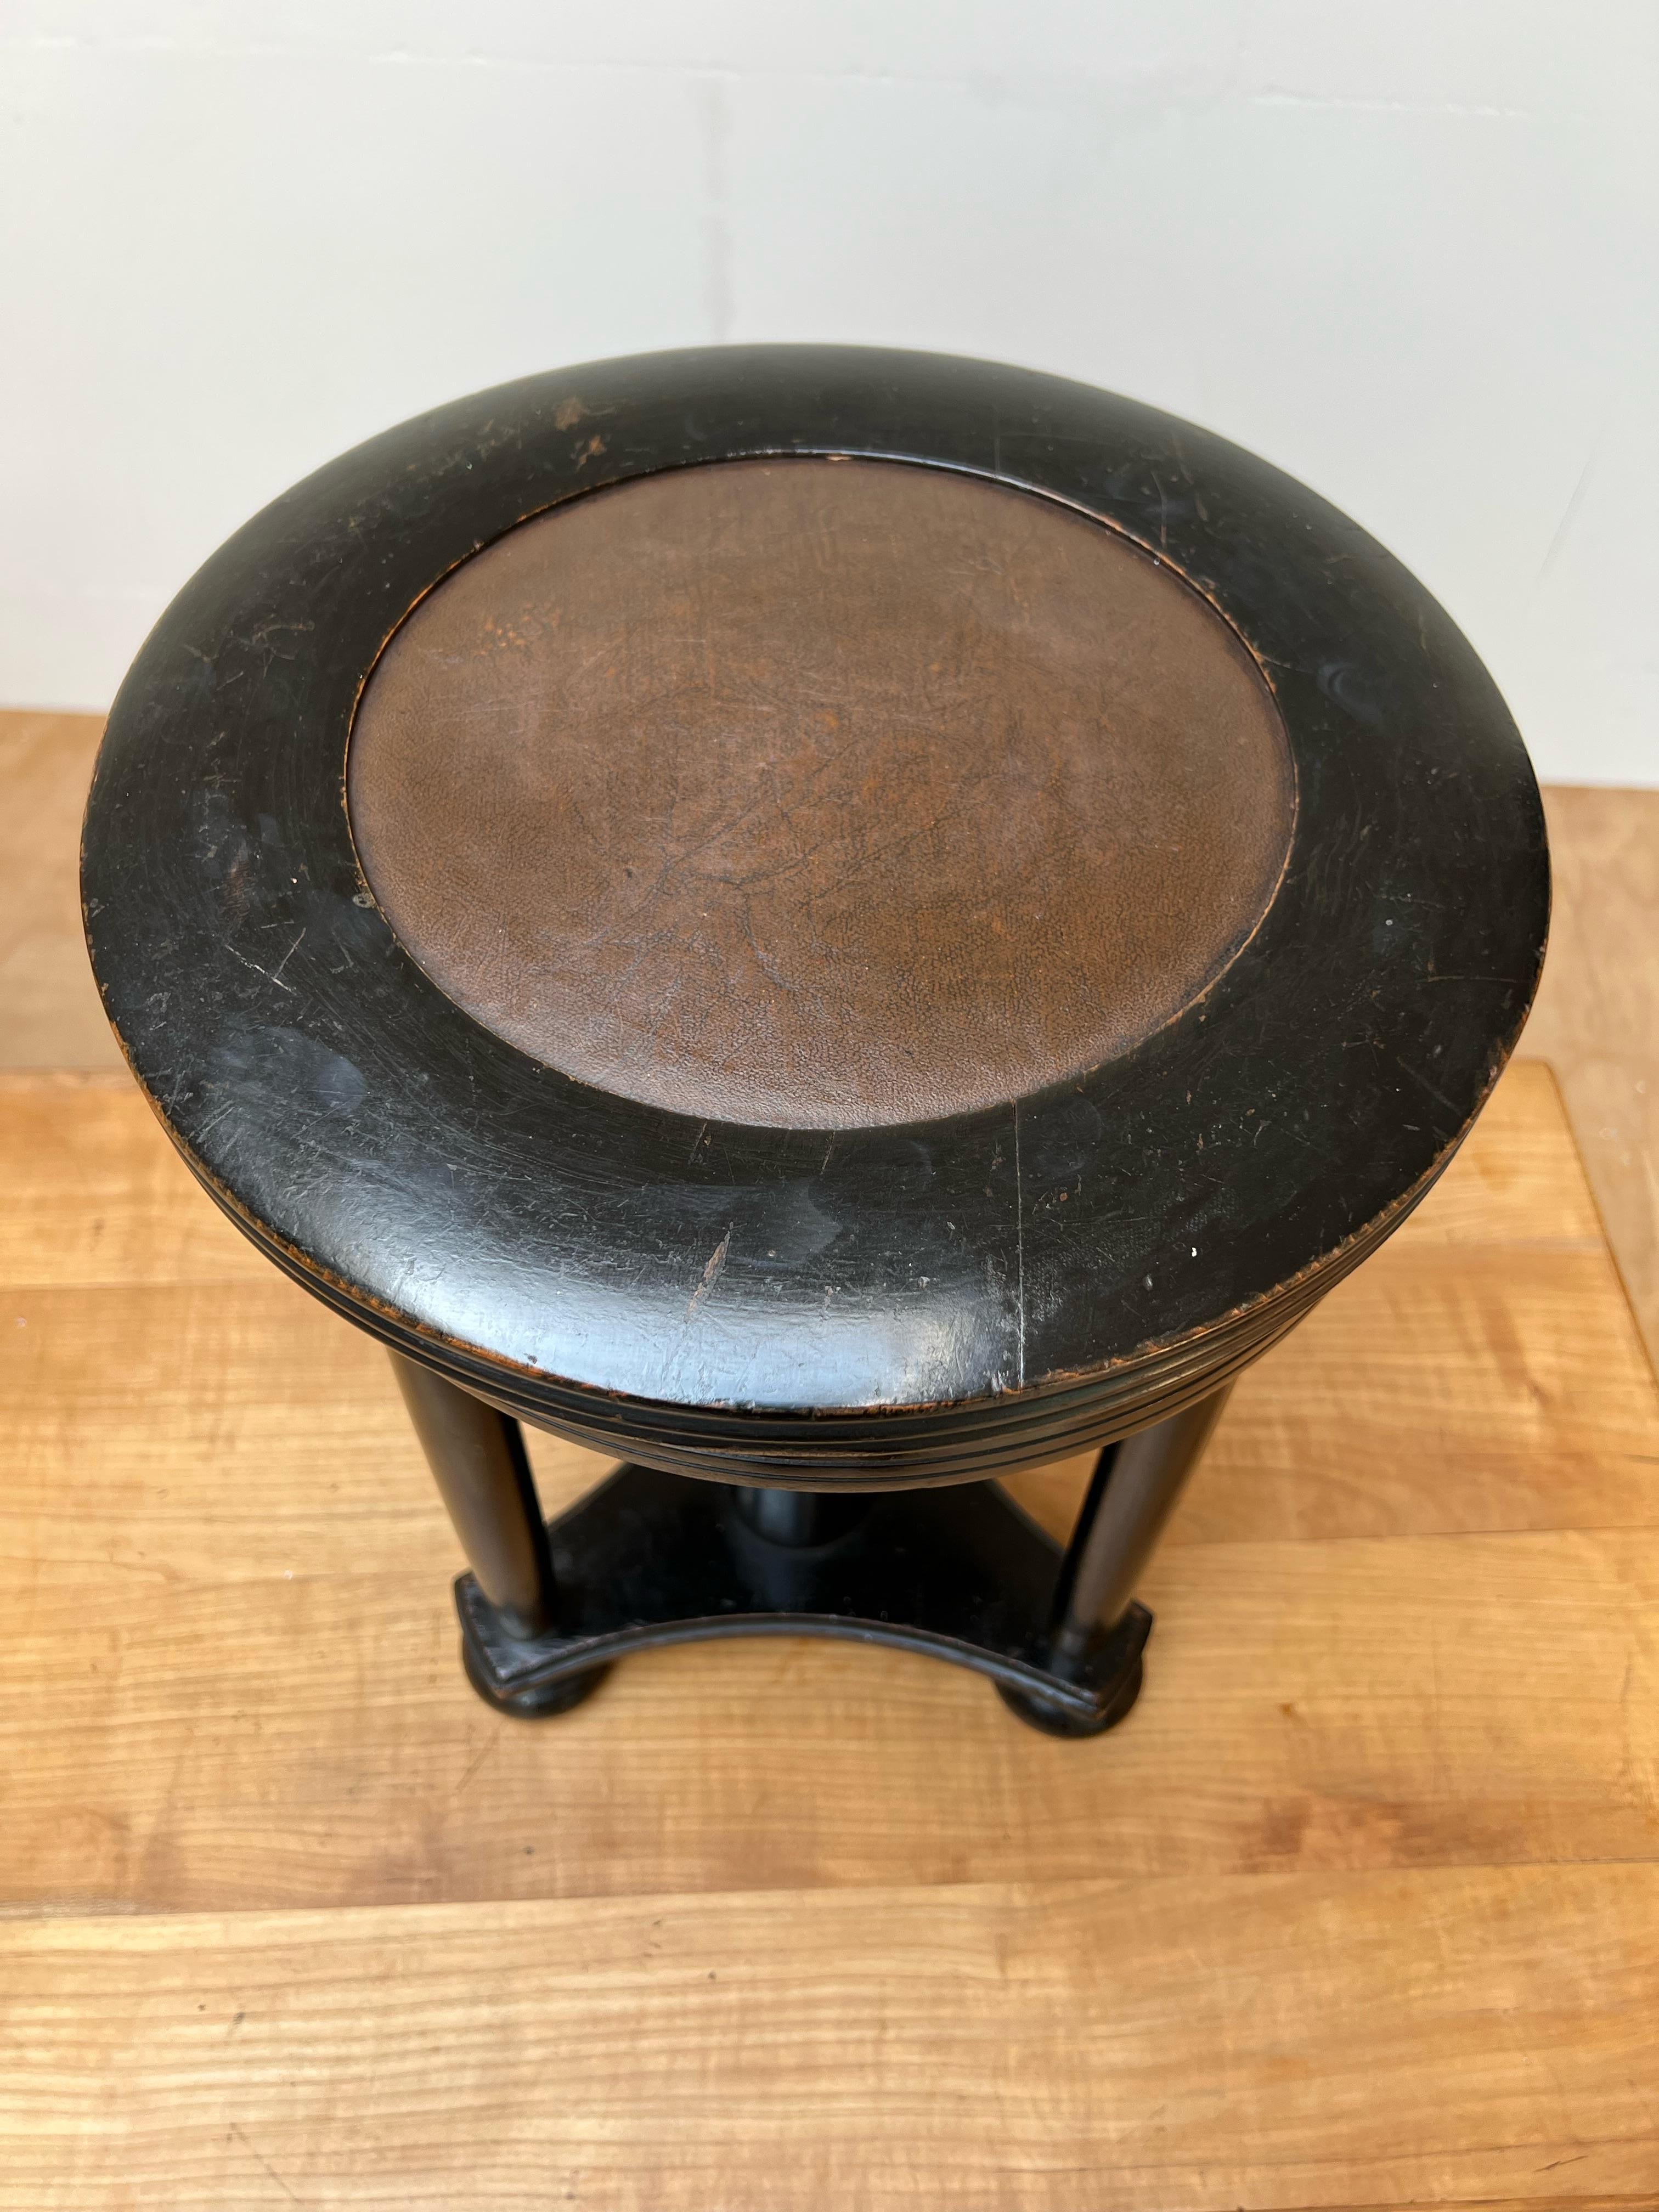 20th Century Stylish Blackened Wooden and Brass Art Deco Desk or Piano Swivel Stool, ca 1900 For Sale